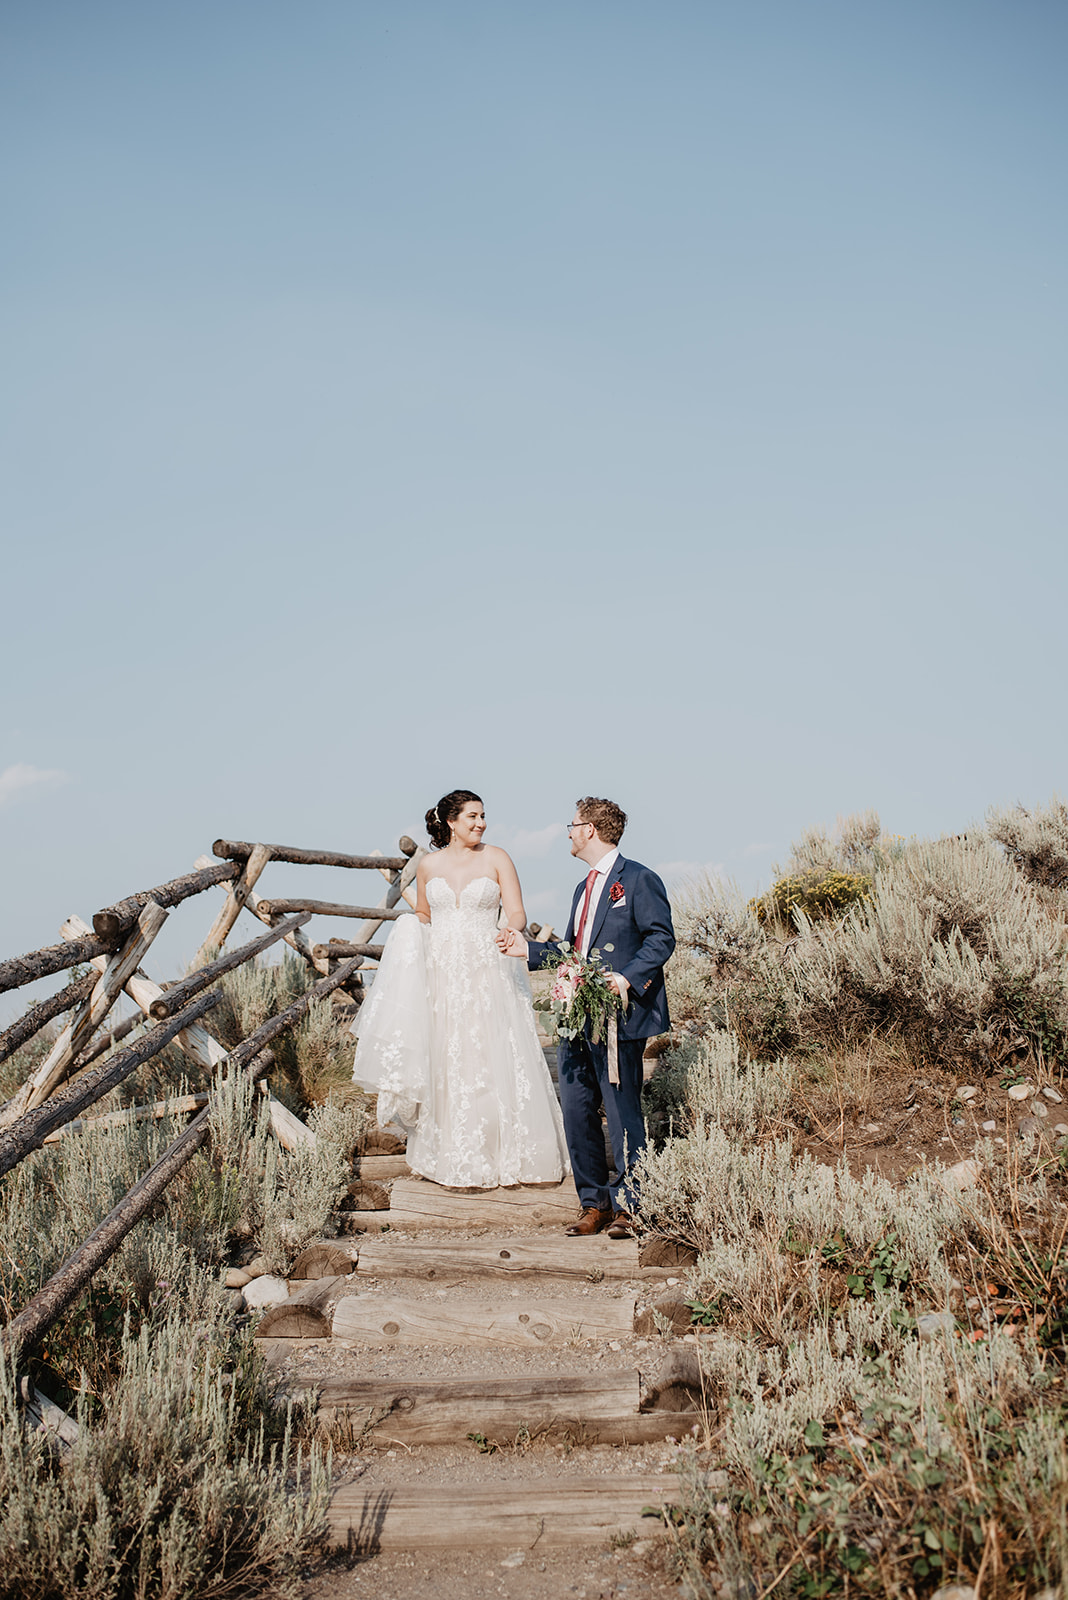 bride and groom walking down a wood and dirt stairway in the Tetons with sage brush around them and blue skies behind them. Bride is in a dainty lace dress with a full skirt